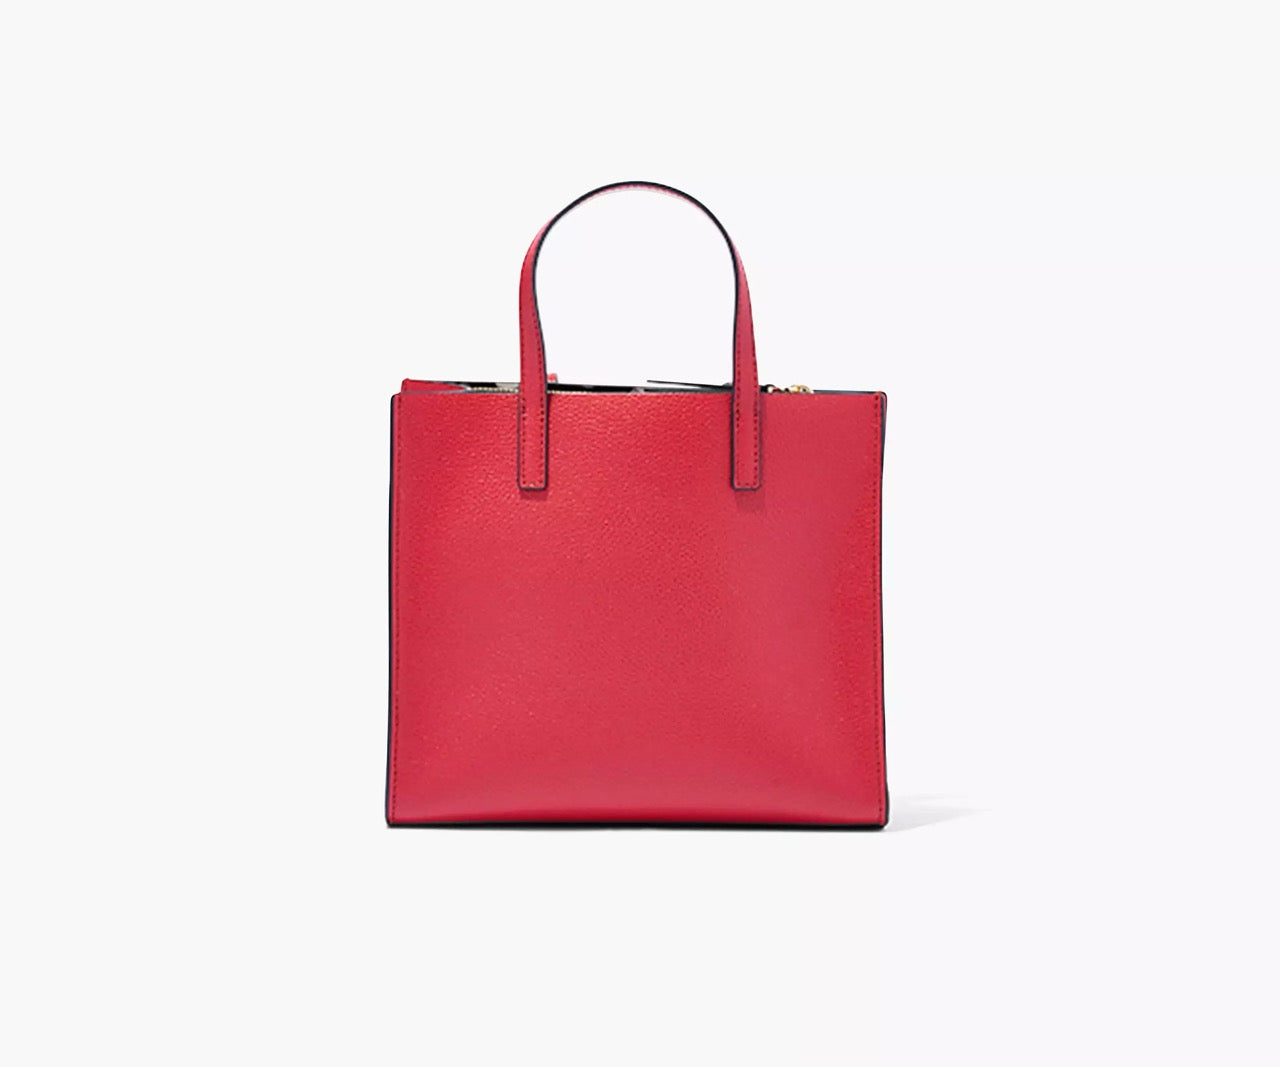 Marc Jacobs Mini Grind Tote Bag in Savvy Red (M0015685-607)